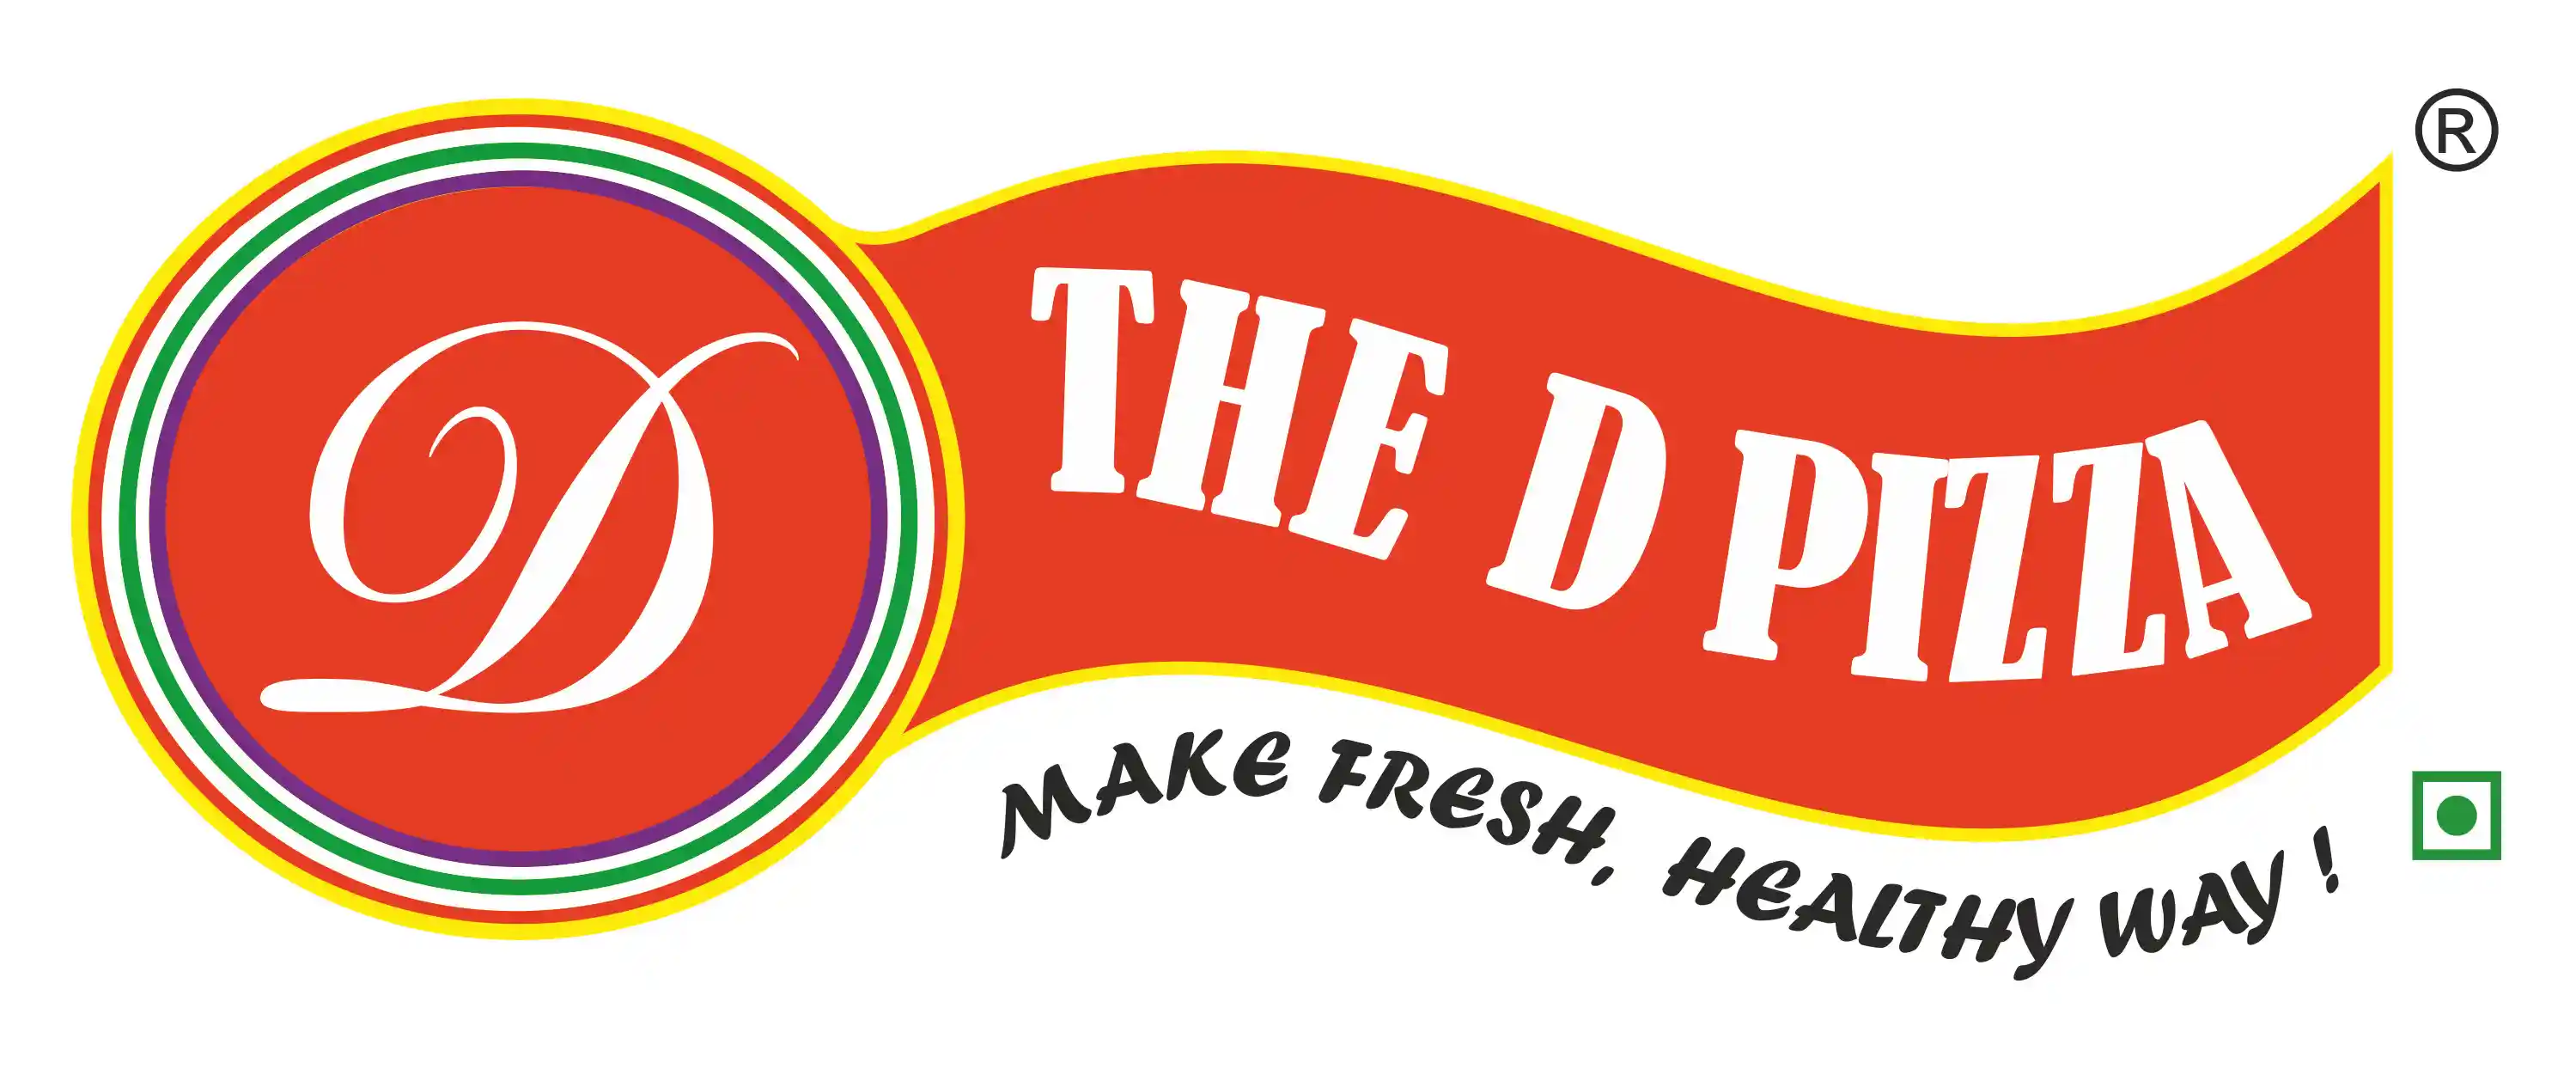 THE D PIZZA